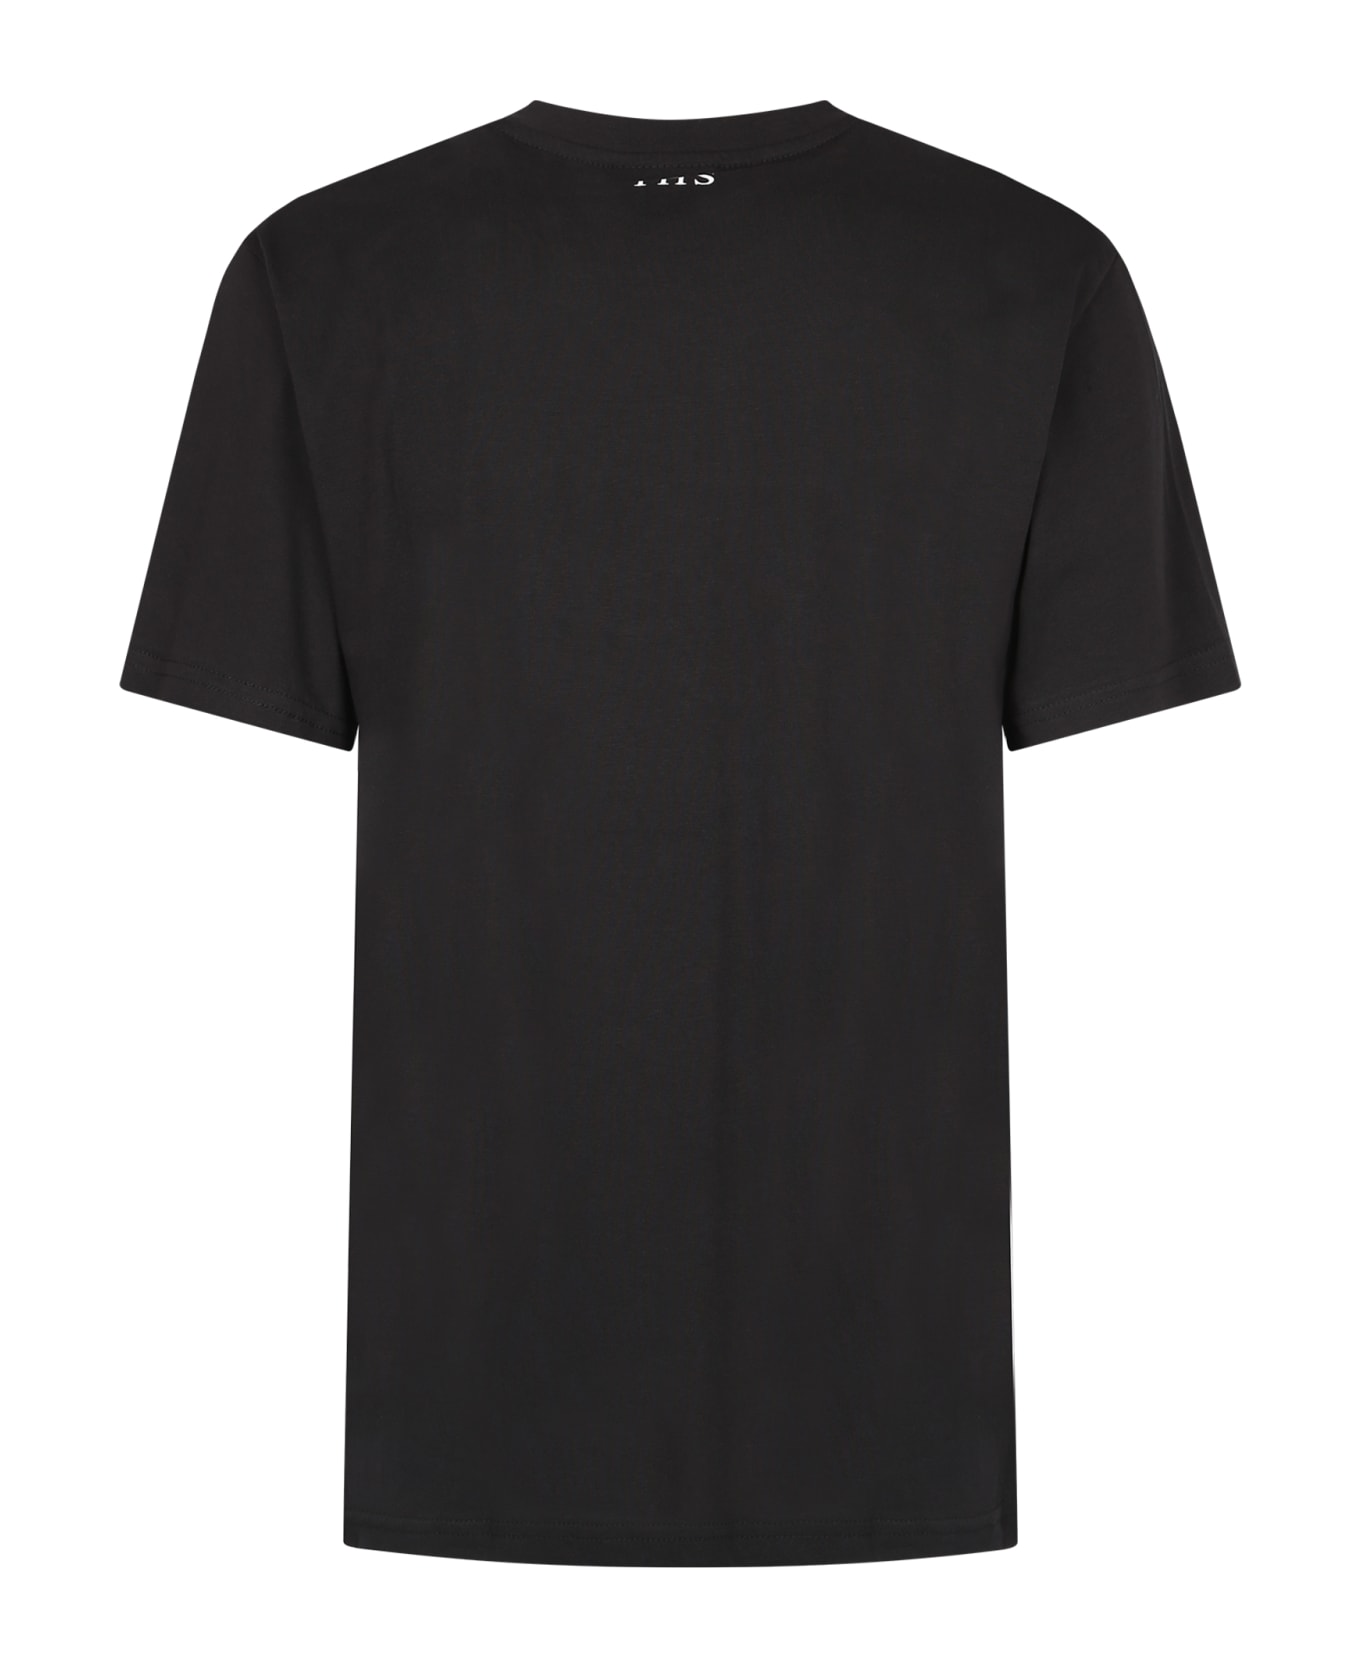 Ihs Relaxed Fit T-shirt - Black